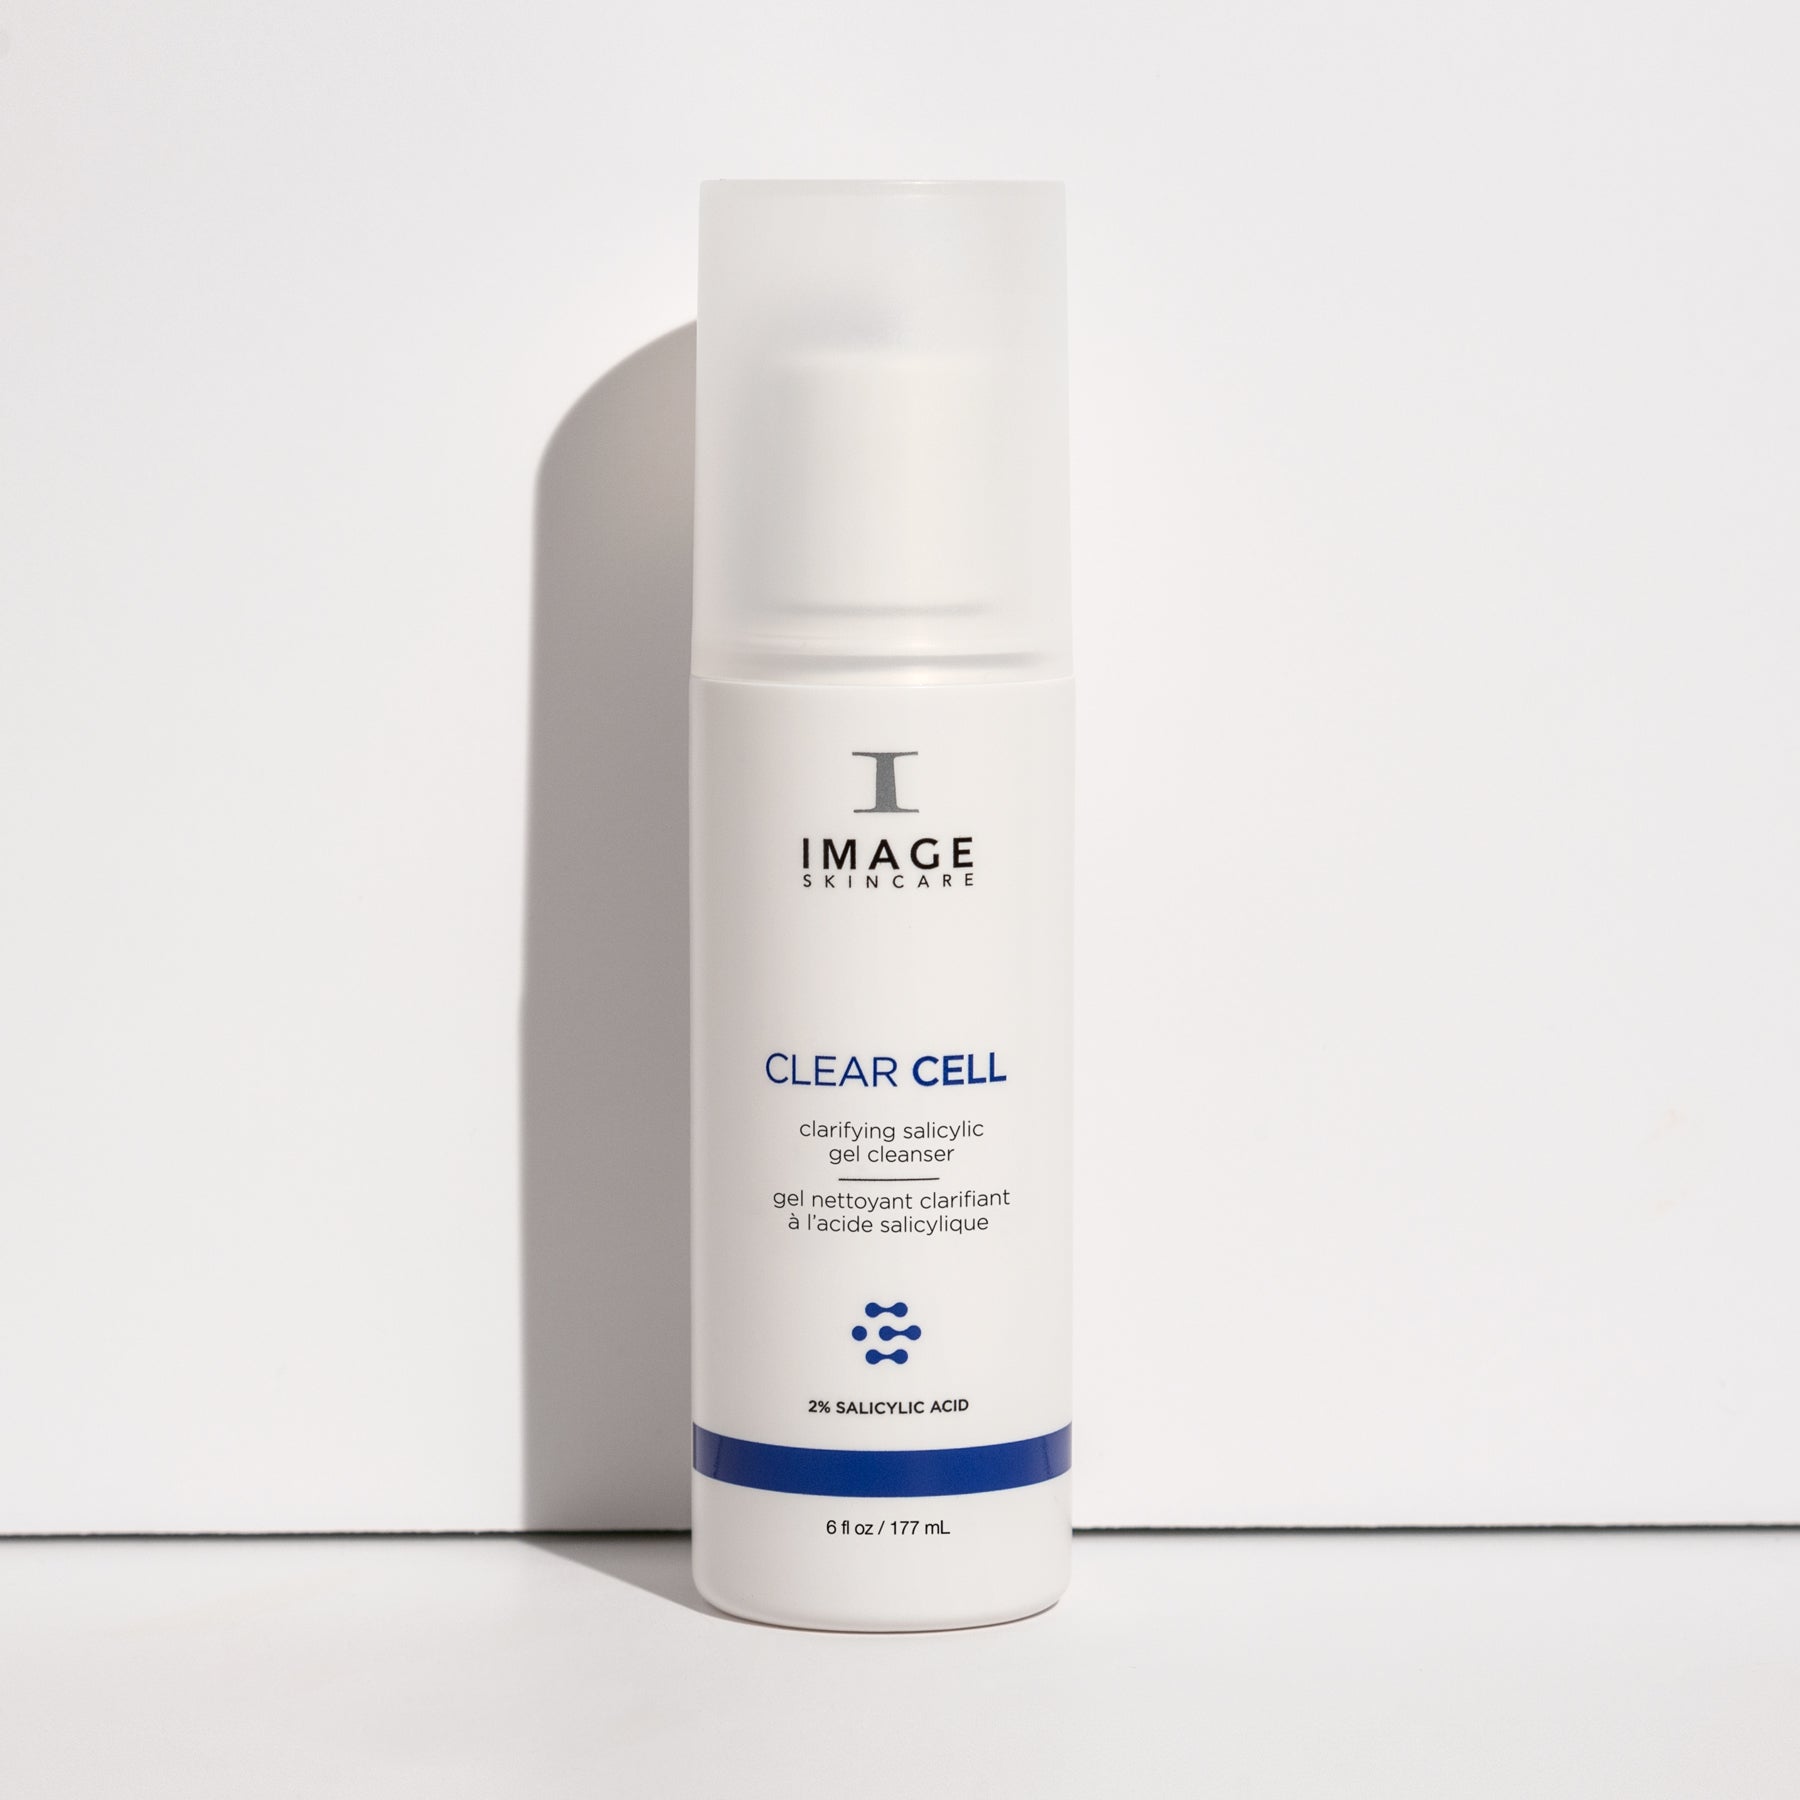 CLEAR CELL salicylic gel cleanser | IMAGE Skincare